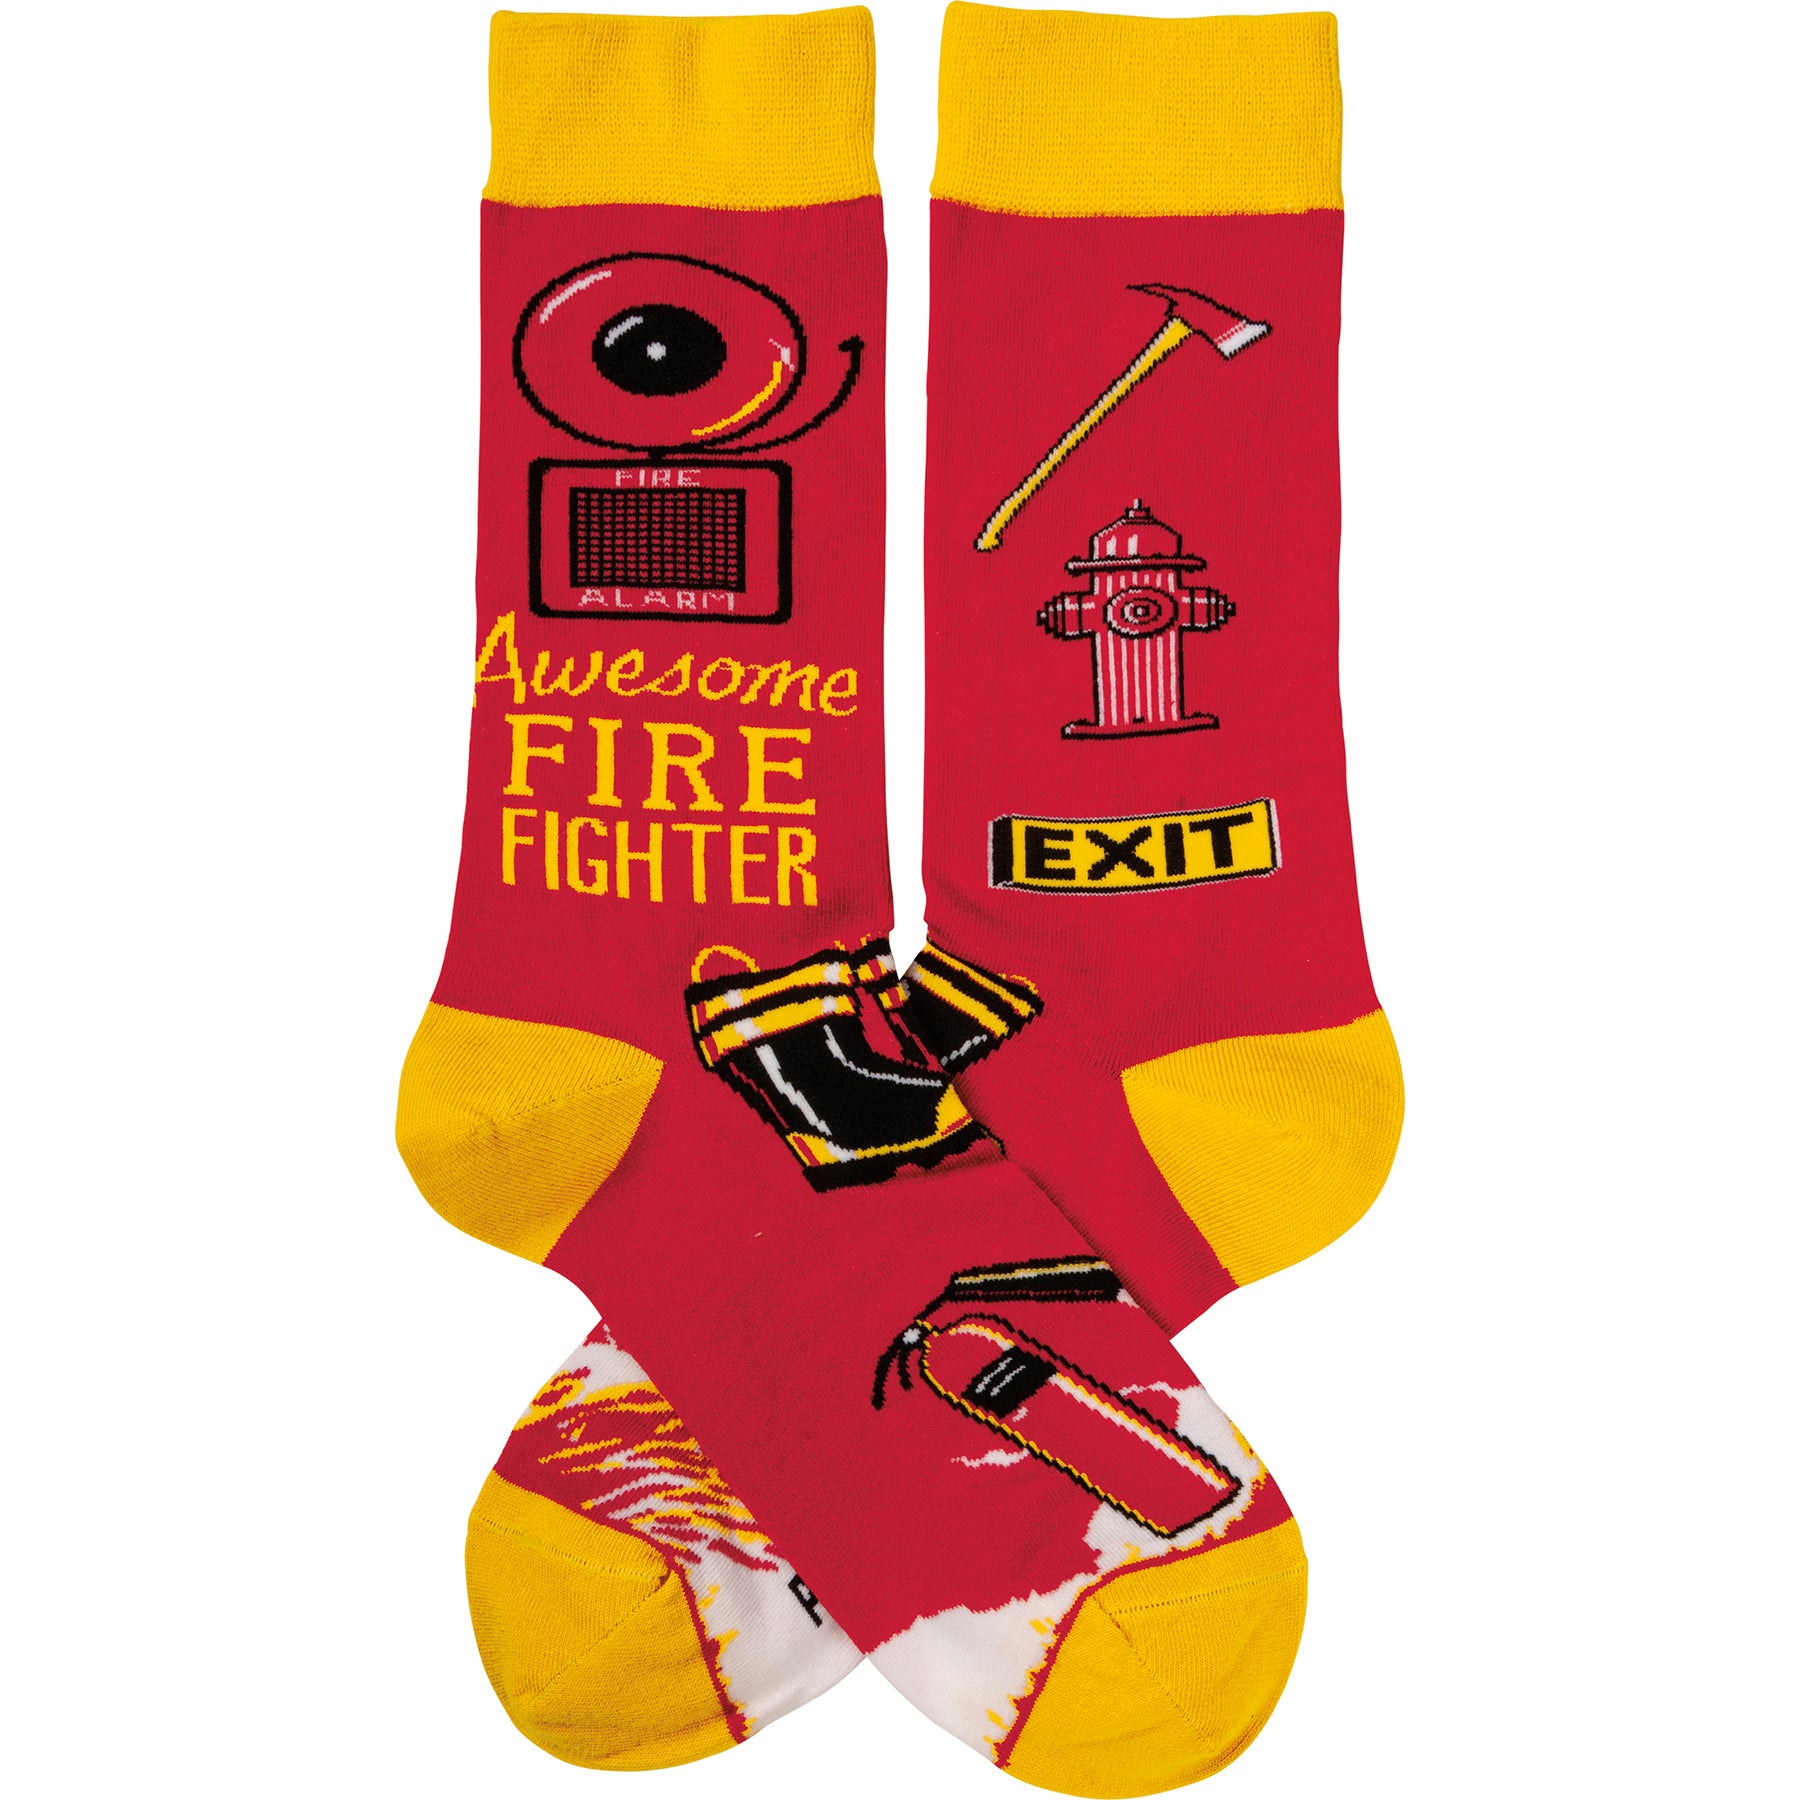 Awesome Fire Fighter Socks